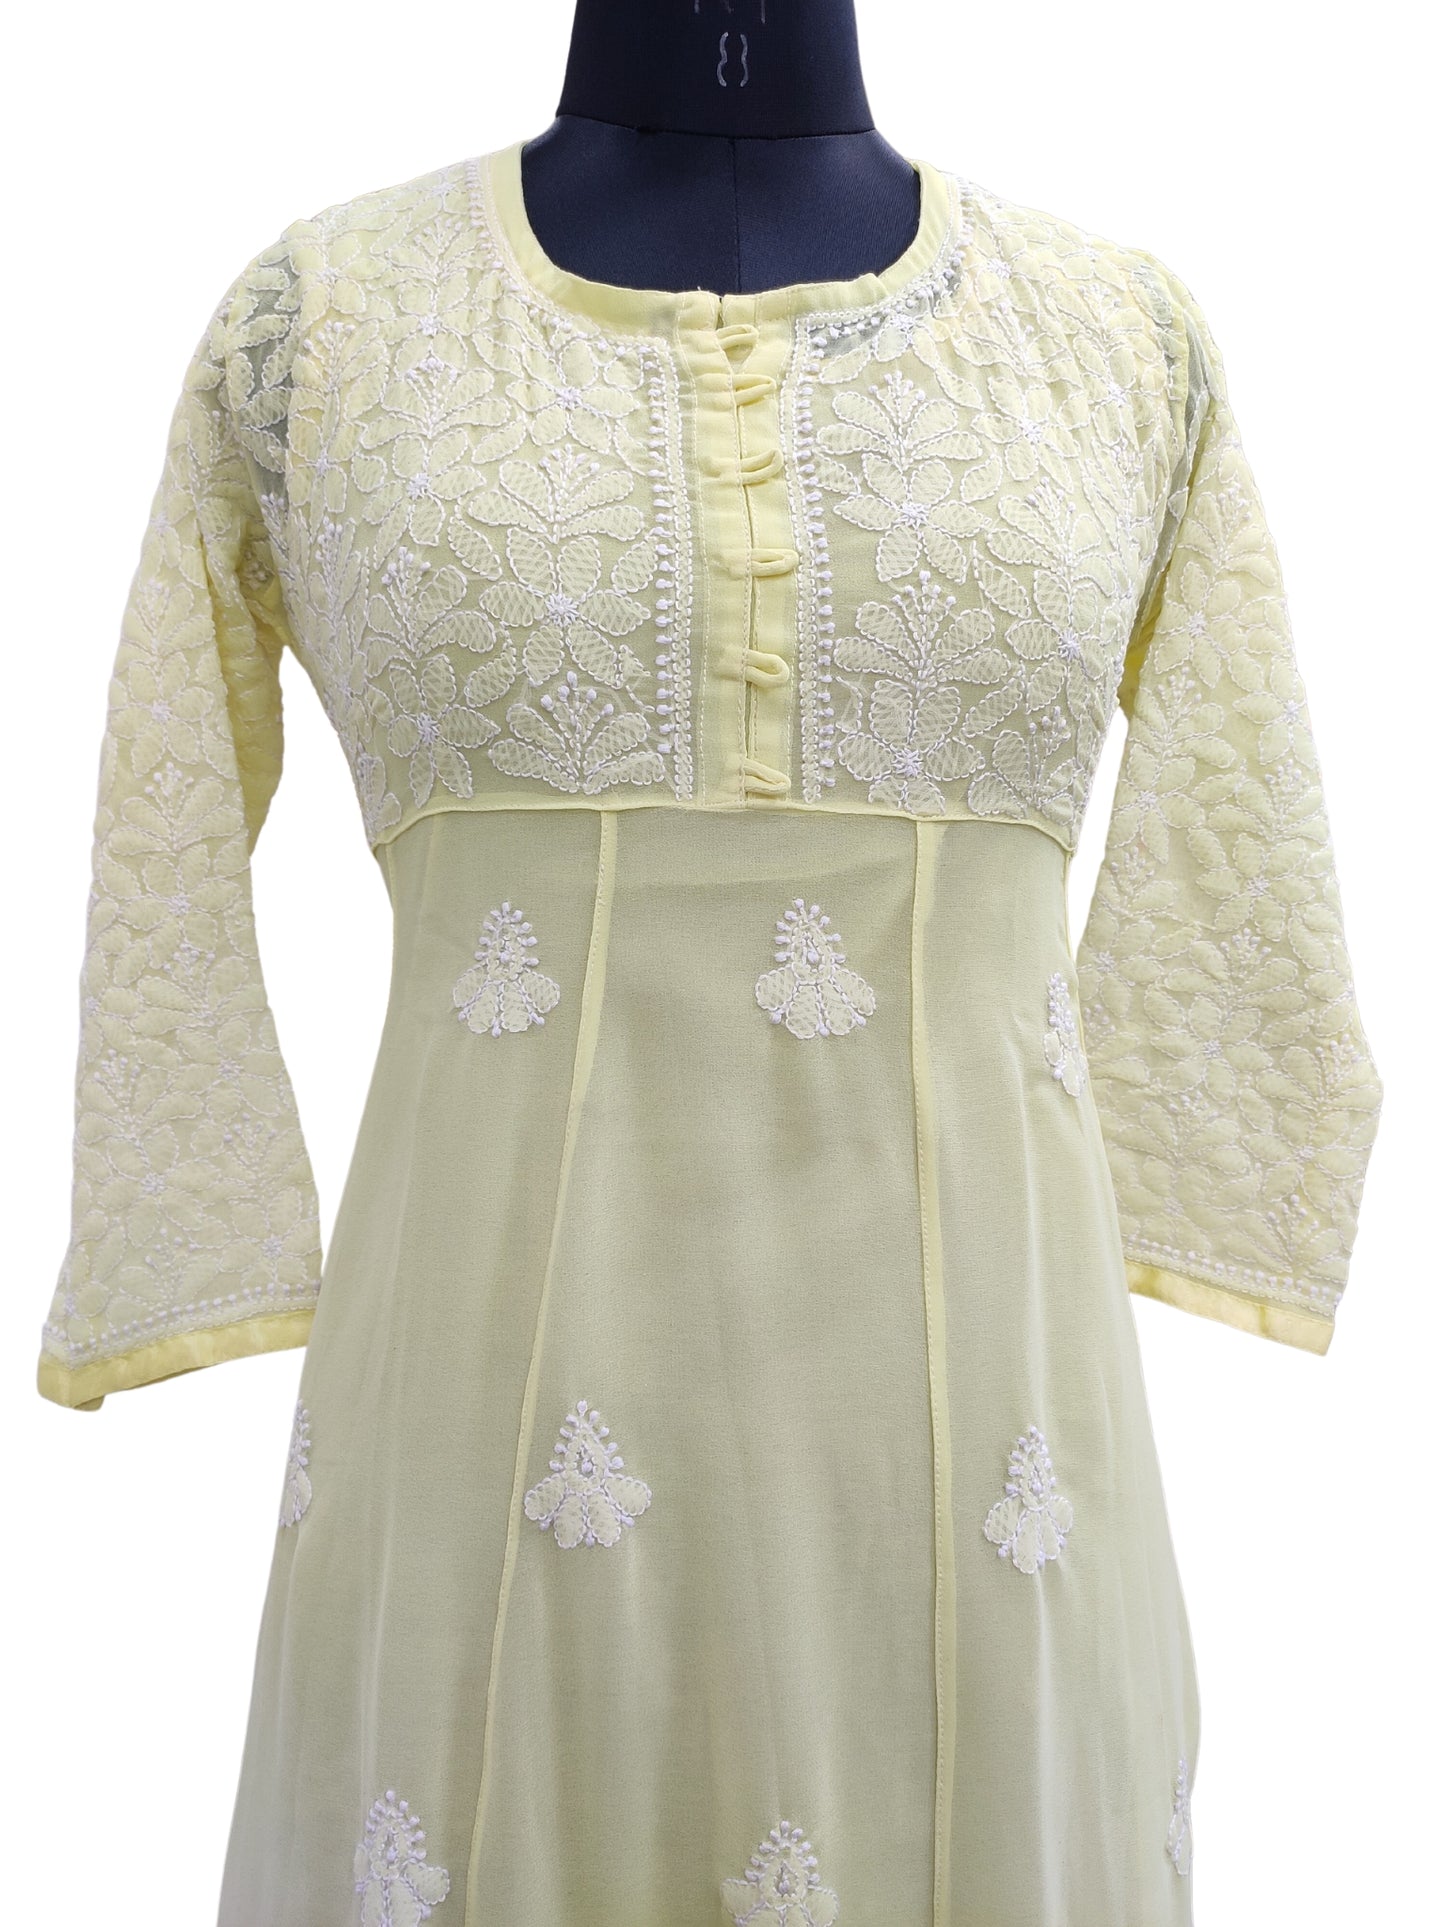 Shyamal Chikan Hand Embroidered Lemon Georgette Lucknowi Chikankari Gown - S5058